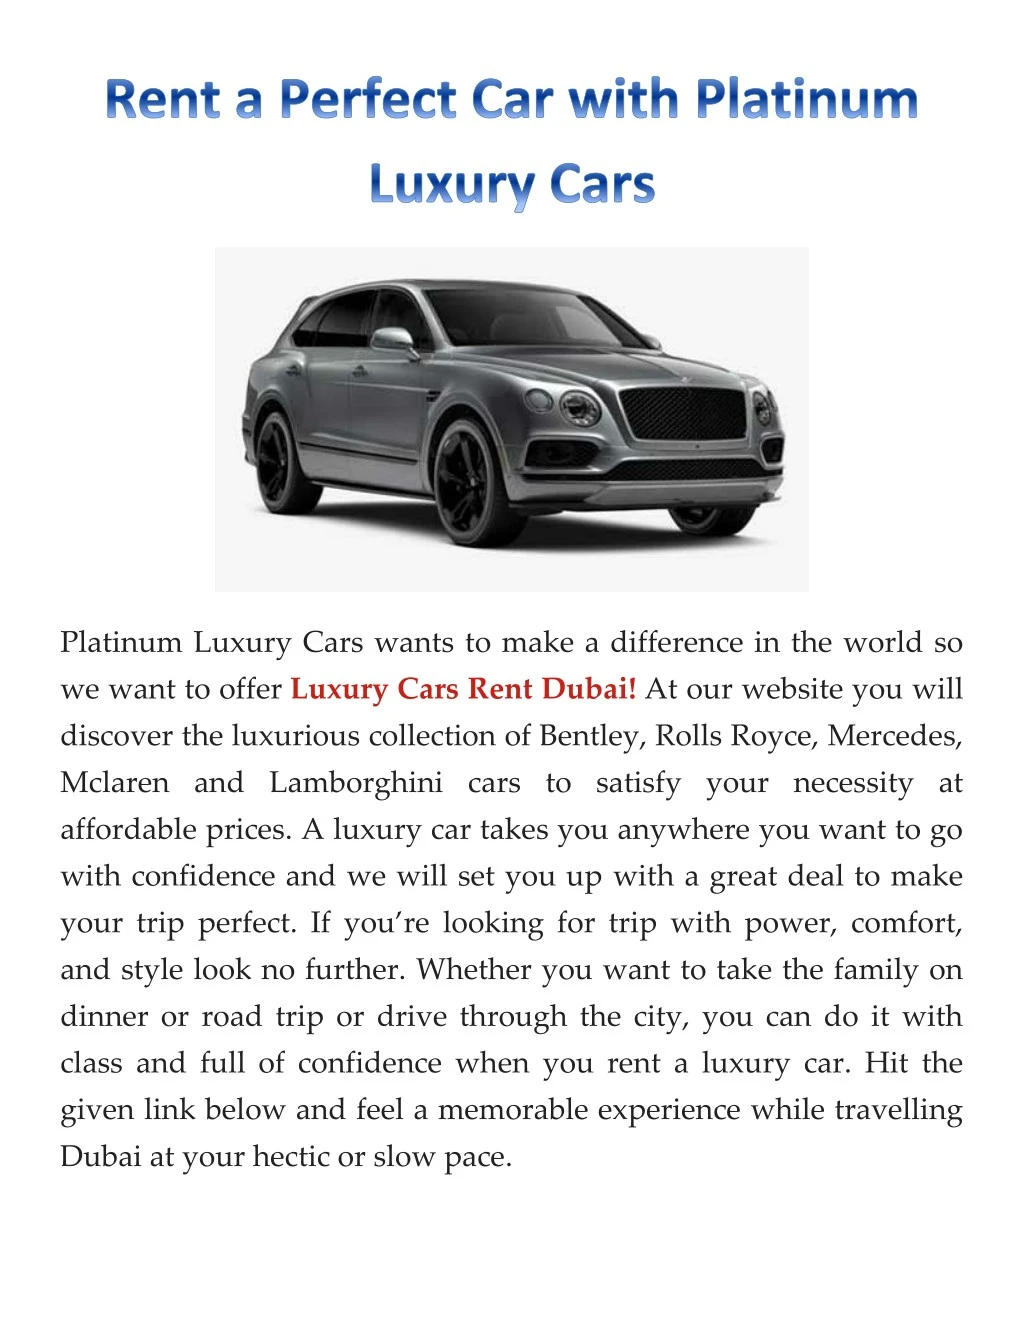 platinum luxury cars wants to make a difference